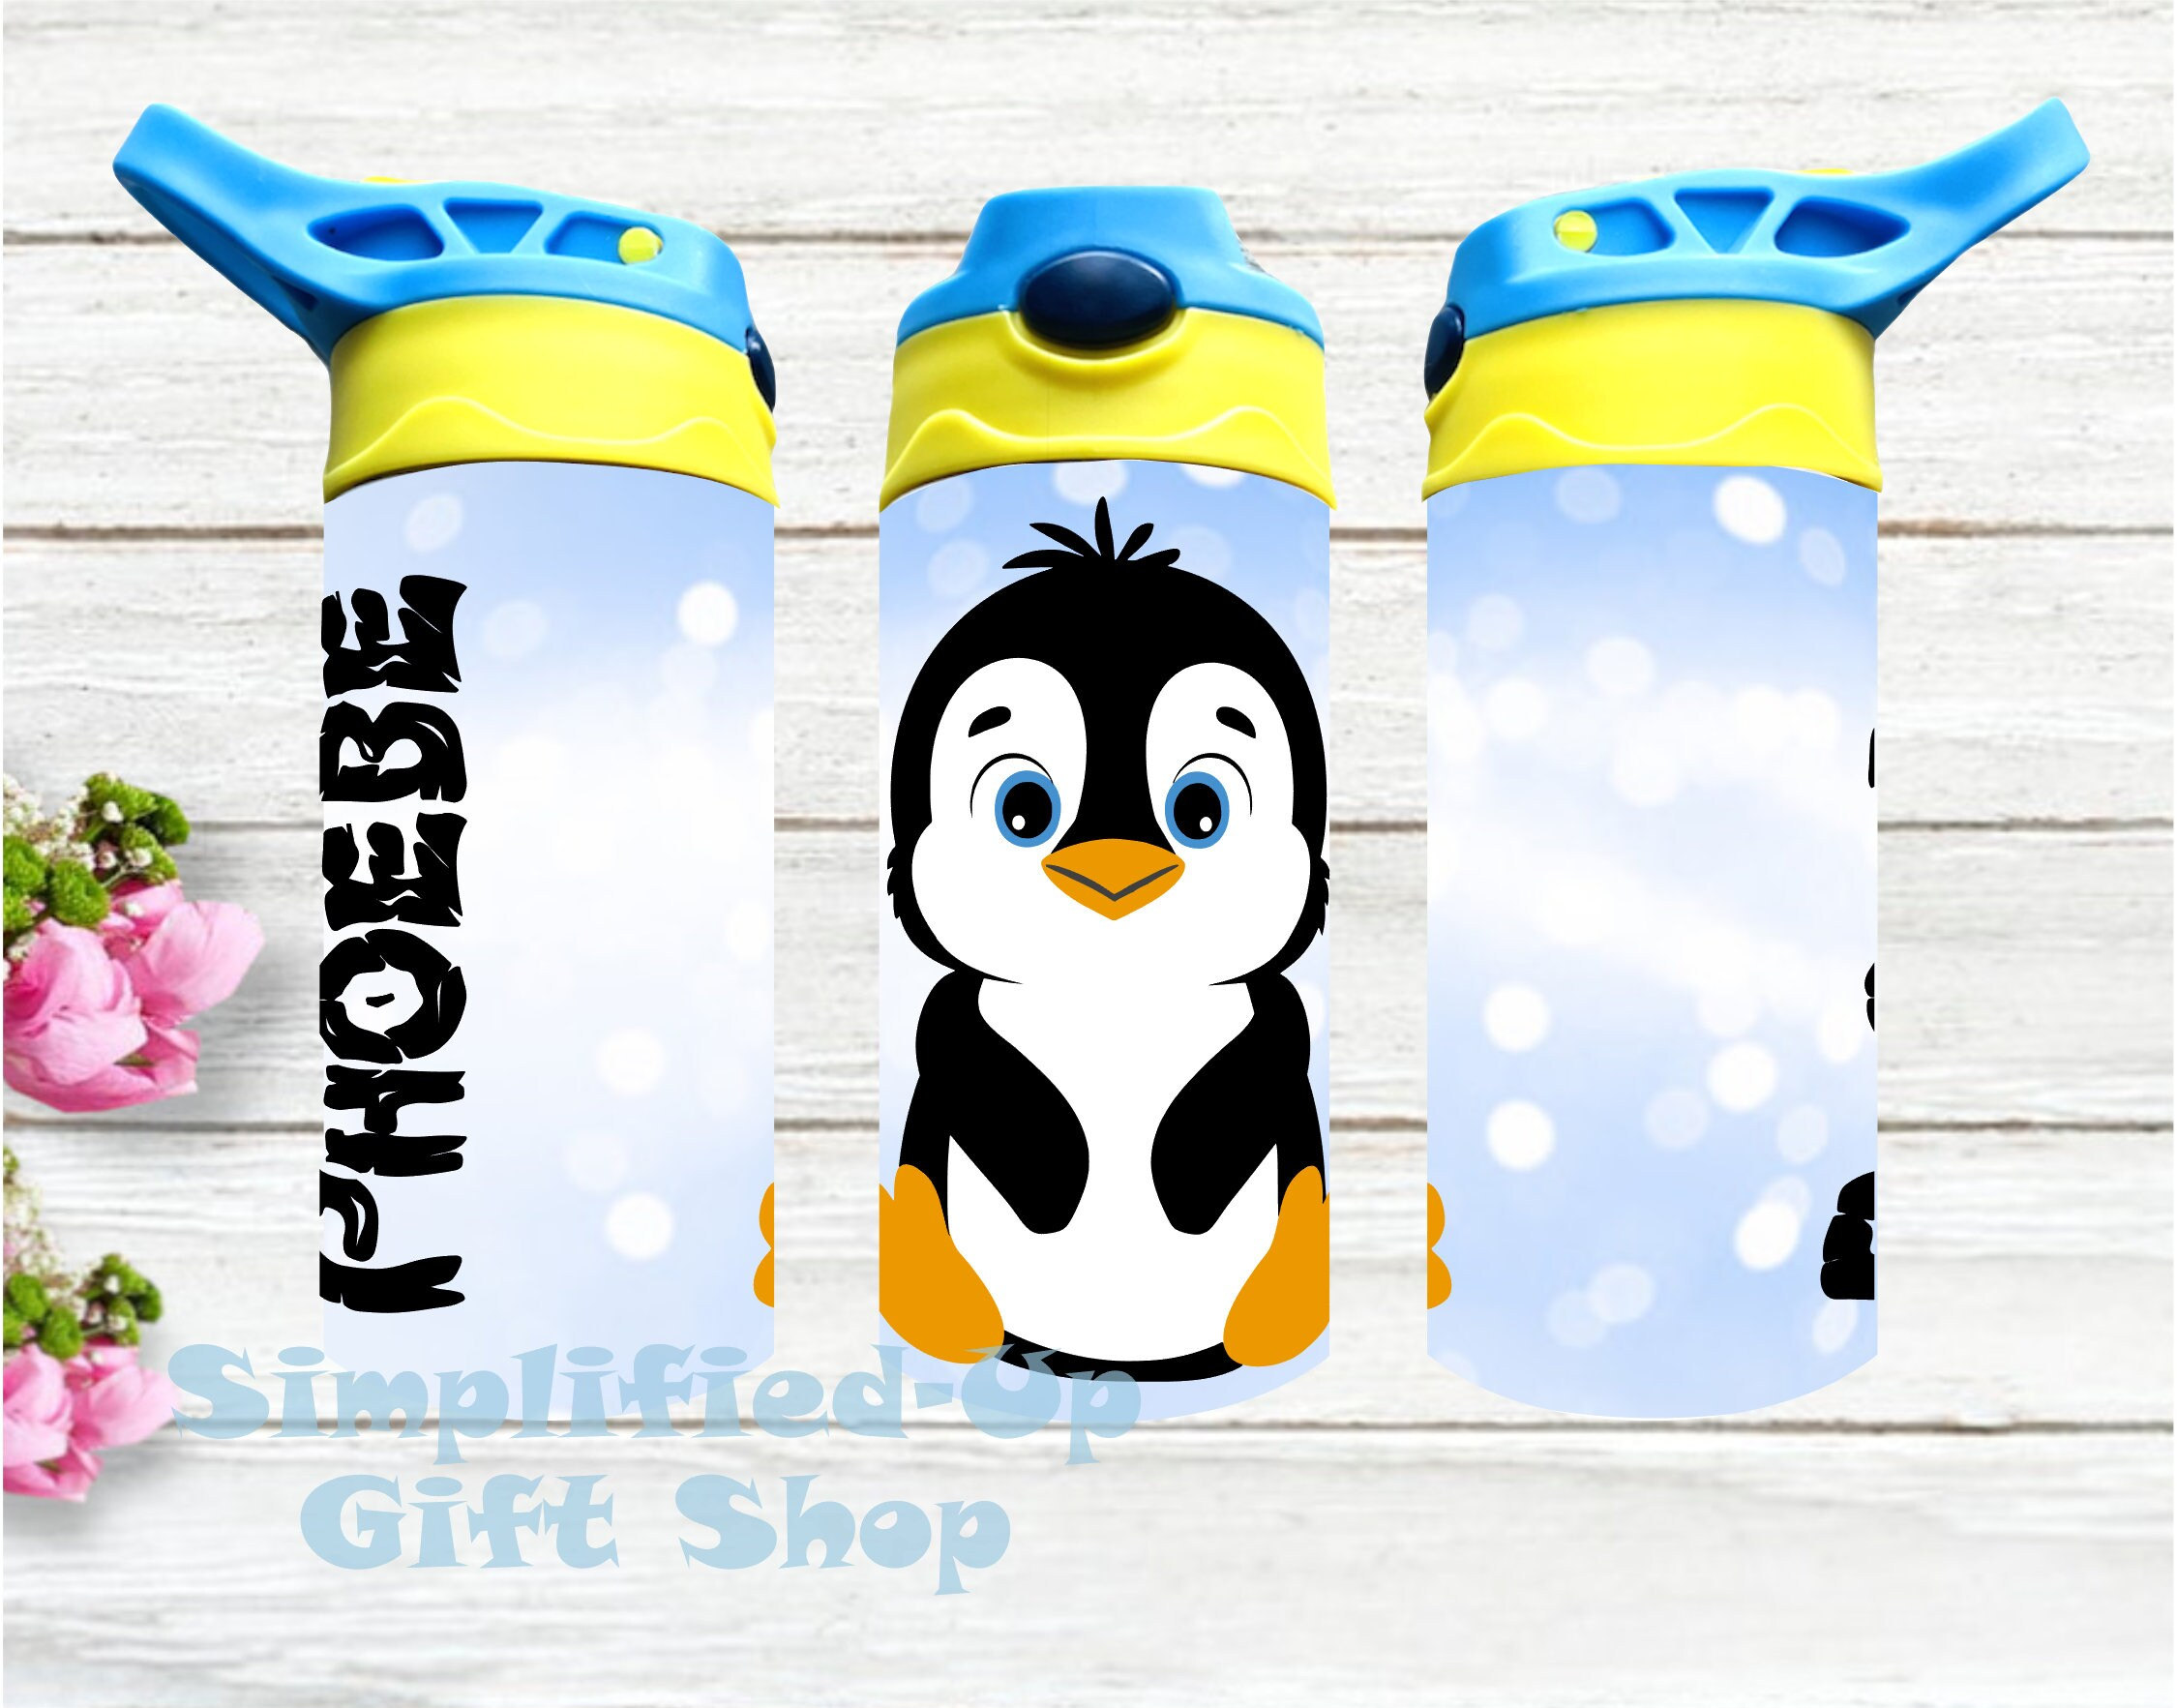 Custom Insulated Sippy Cup, Removable Handles Kids Drink-ware, Gift for  Child/grandchildren, Double Wall Insulated Spill-proof Cup 